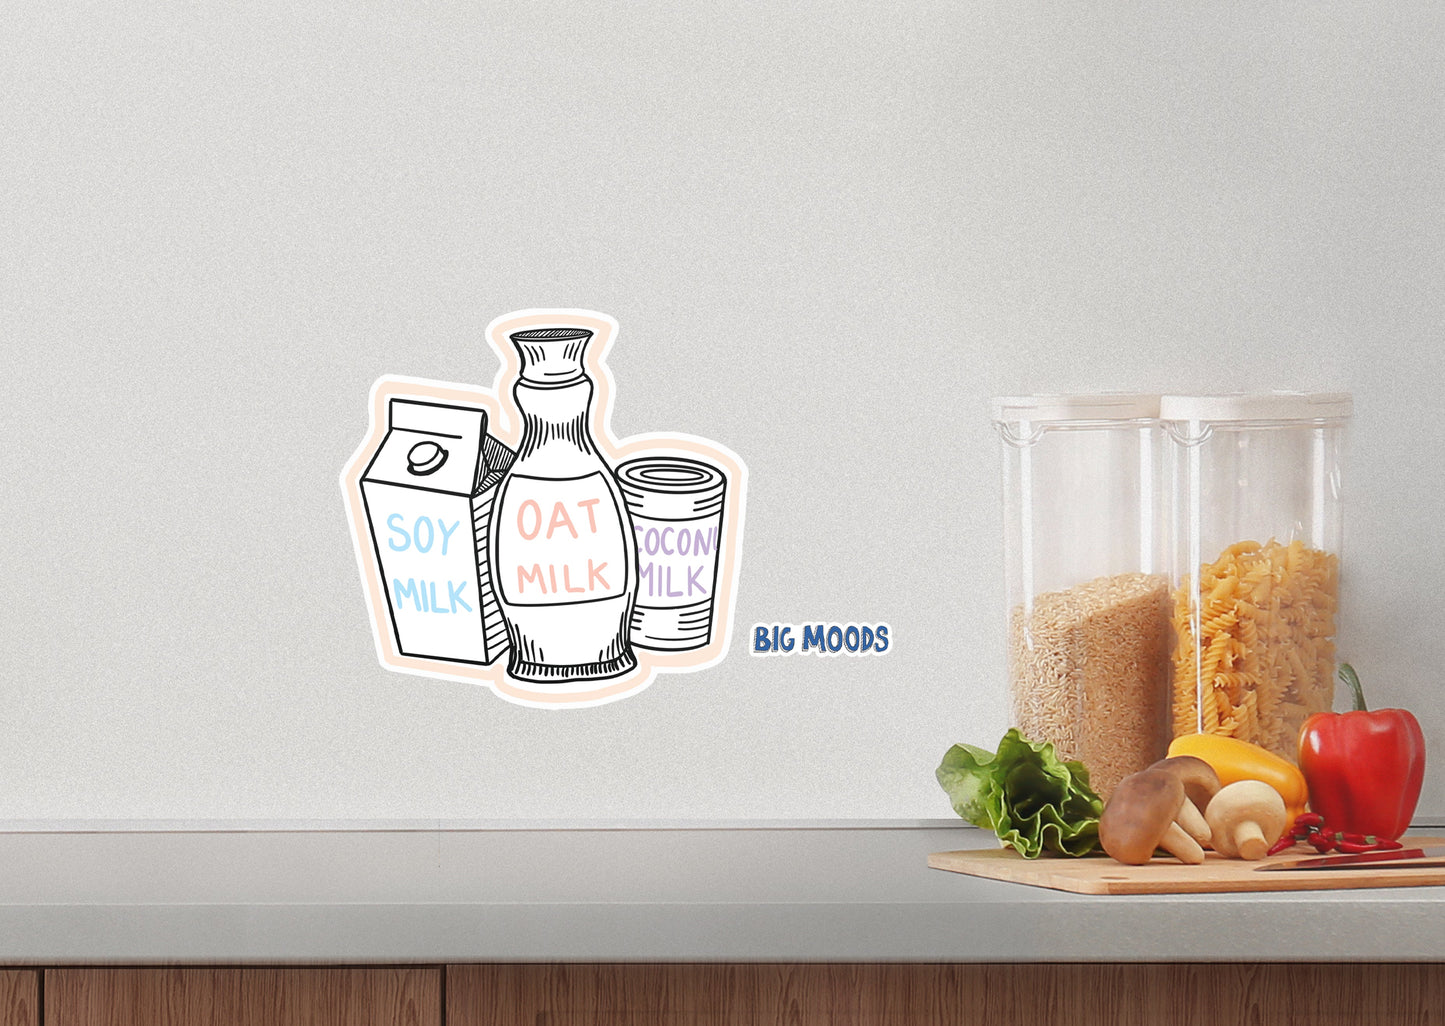 Soy Milk, Oat Milk, Coconut Milk        - Officially Licensed Big Moods Removable     Adhesive Decal